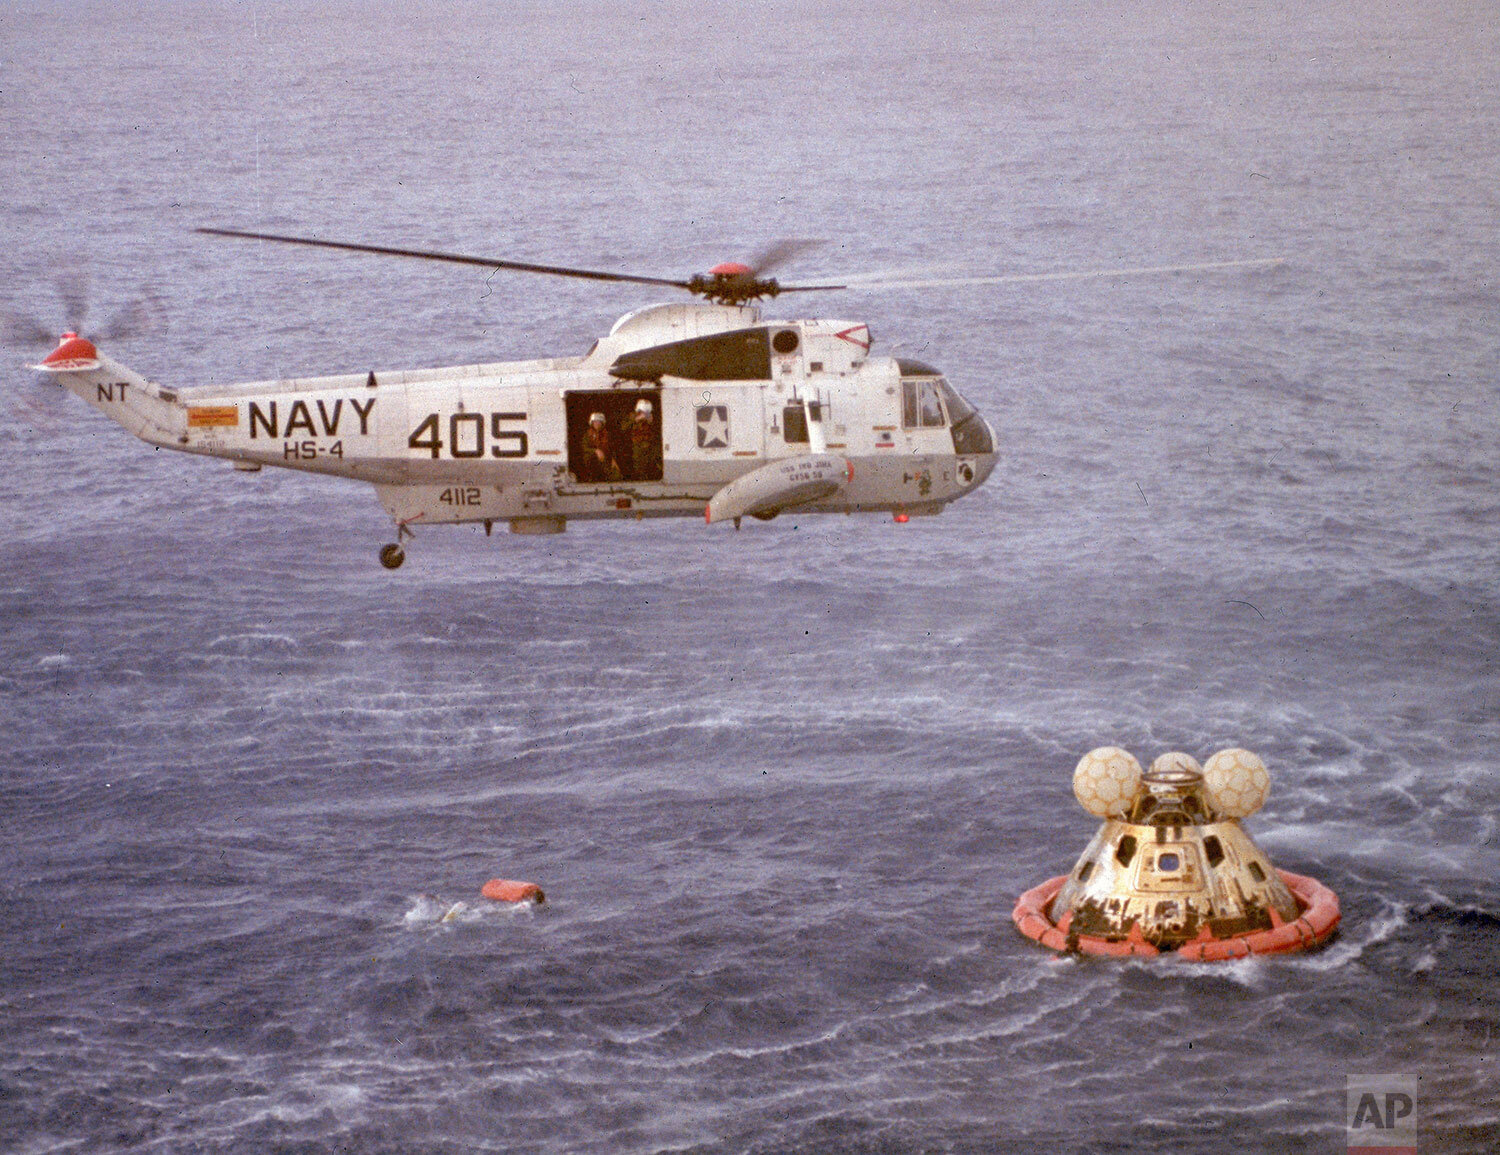  The Command Module Odyssey of the Apollo 13 space mission floats in the Pacific Ocean after splashdown near Samoa, April 17, 1970 while a U.S. Navy helicopter from the recovery ship U.S.S. Iwo Jima attempts to rescue the crew of three astronauts. (A